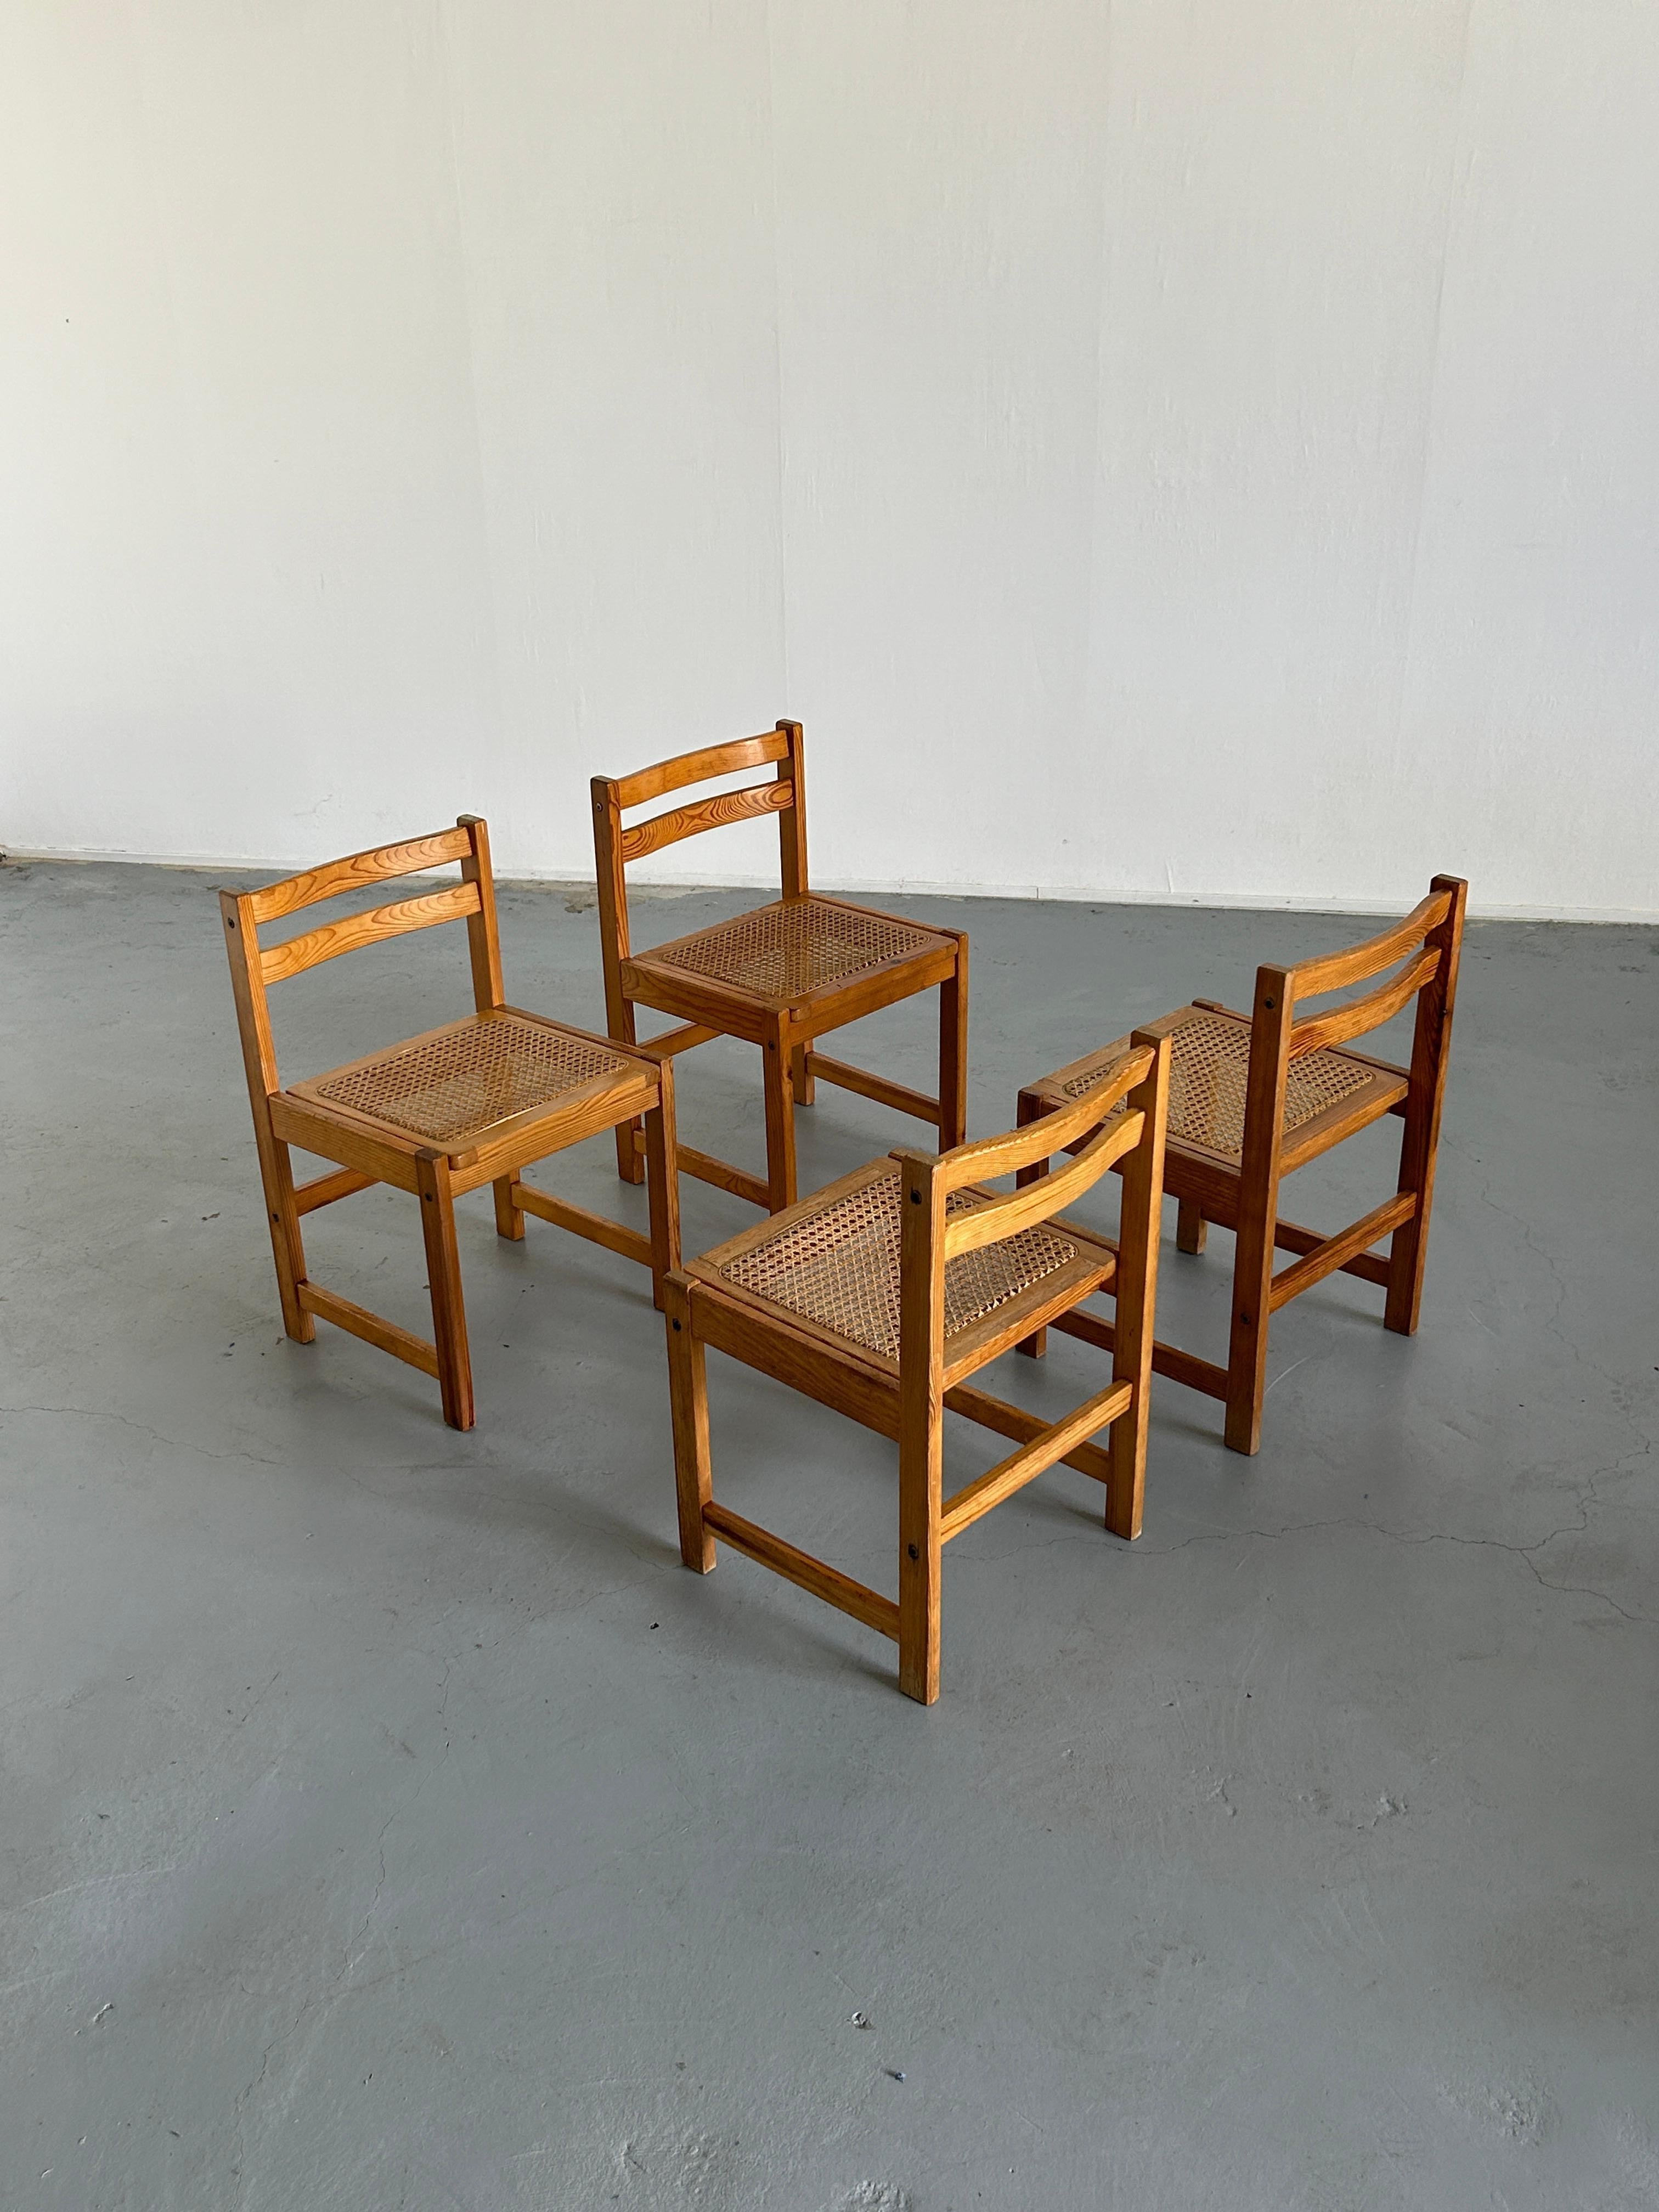 European Set of 4 Vintage Mid-Century Modern Wooden Dining Chairs in Beech and Cane, 60s